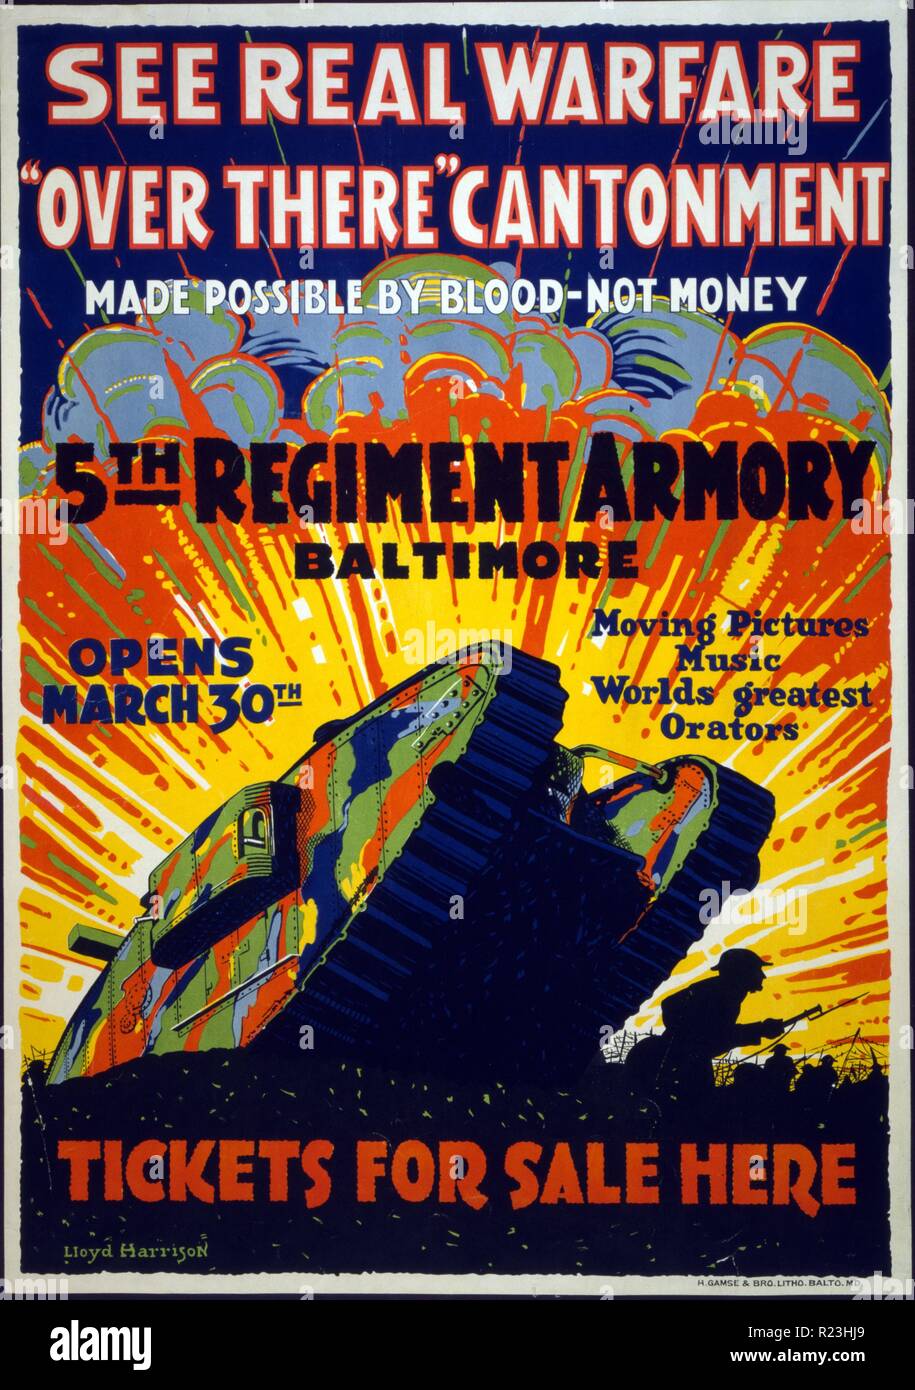 See real warfare - 'over there' cantonment - made possible by blood-not money 5th Regiment Armoury, Baltimore - tickets for sale here. Poster showing a tank climbing across a trench. Stock Photo